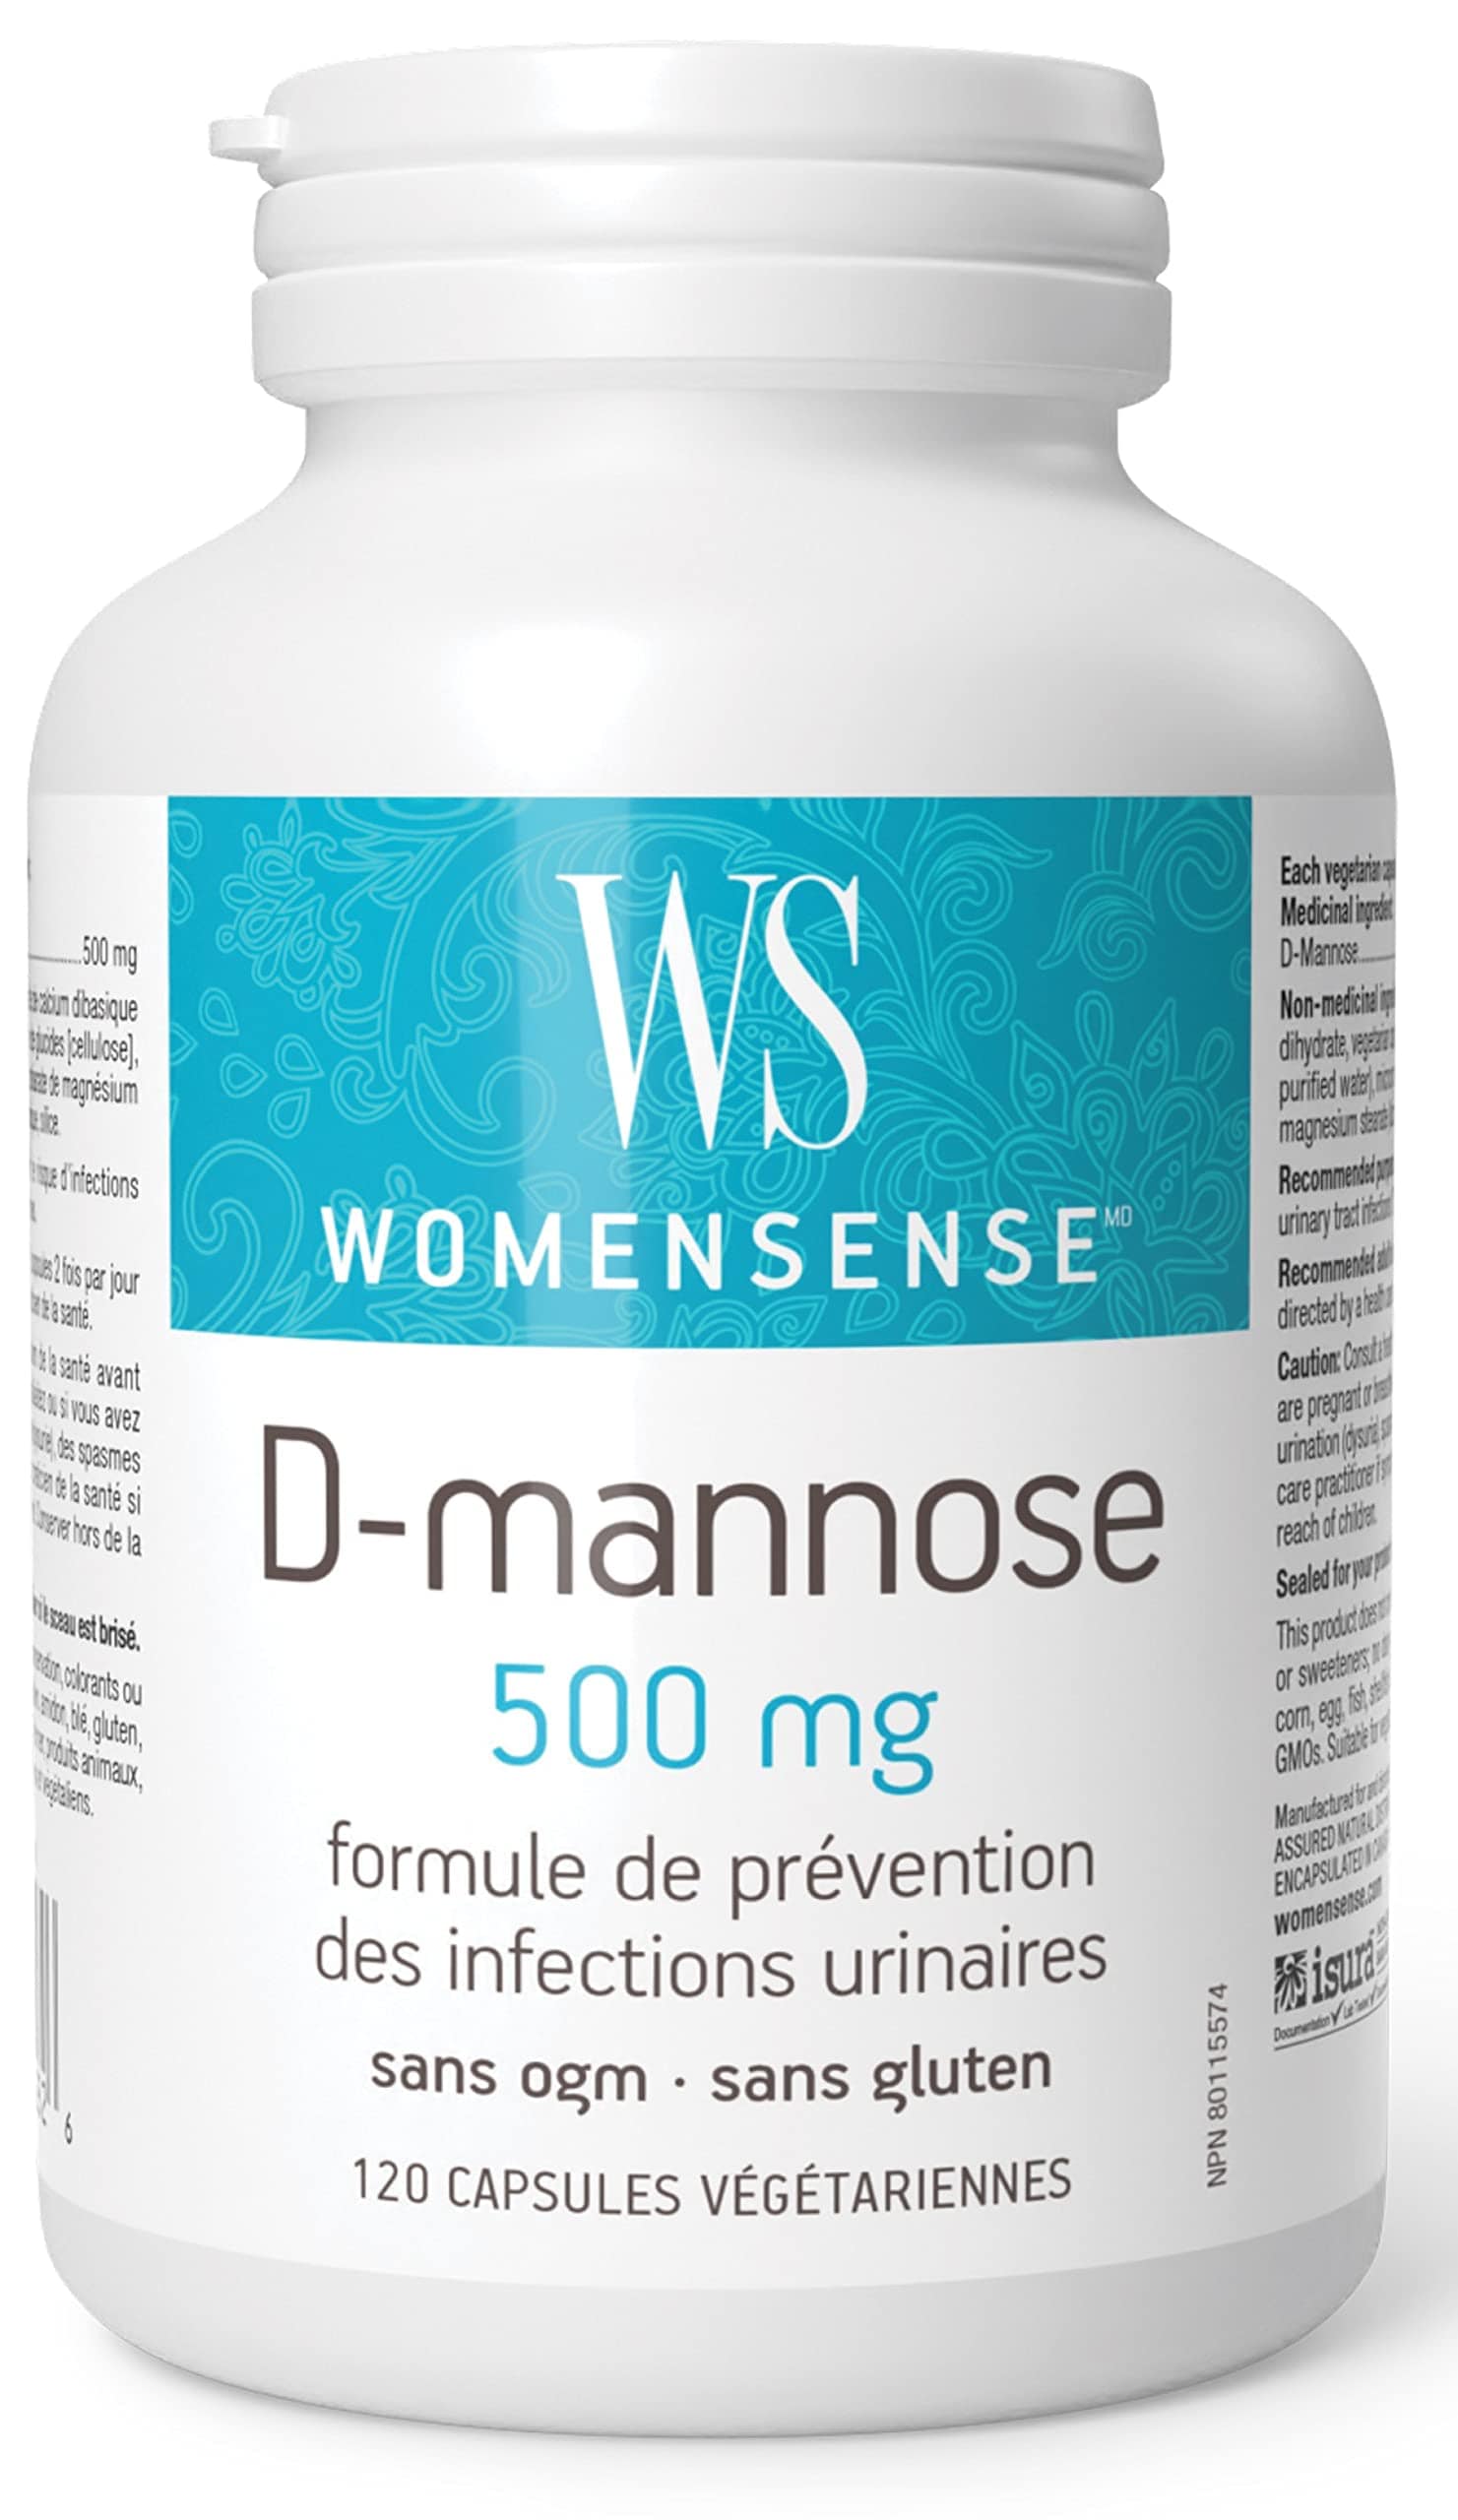 PREFERRED NUTRITION Suppléments D-Mannose 500mg 120vcaps